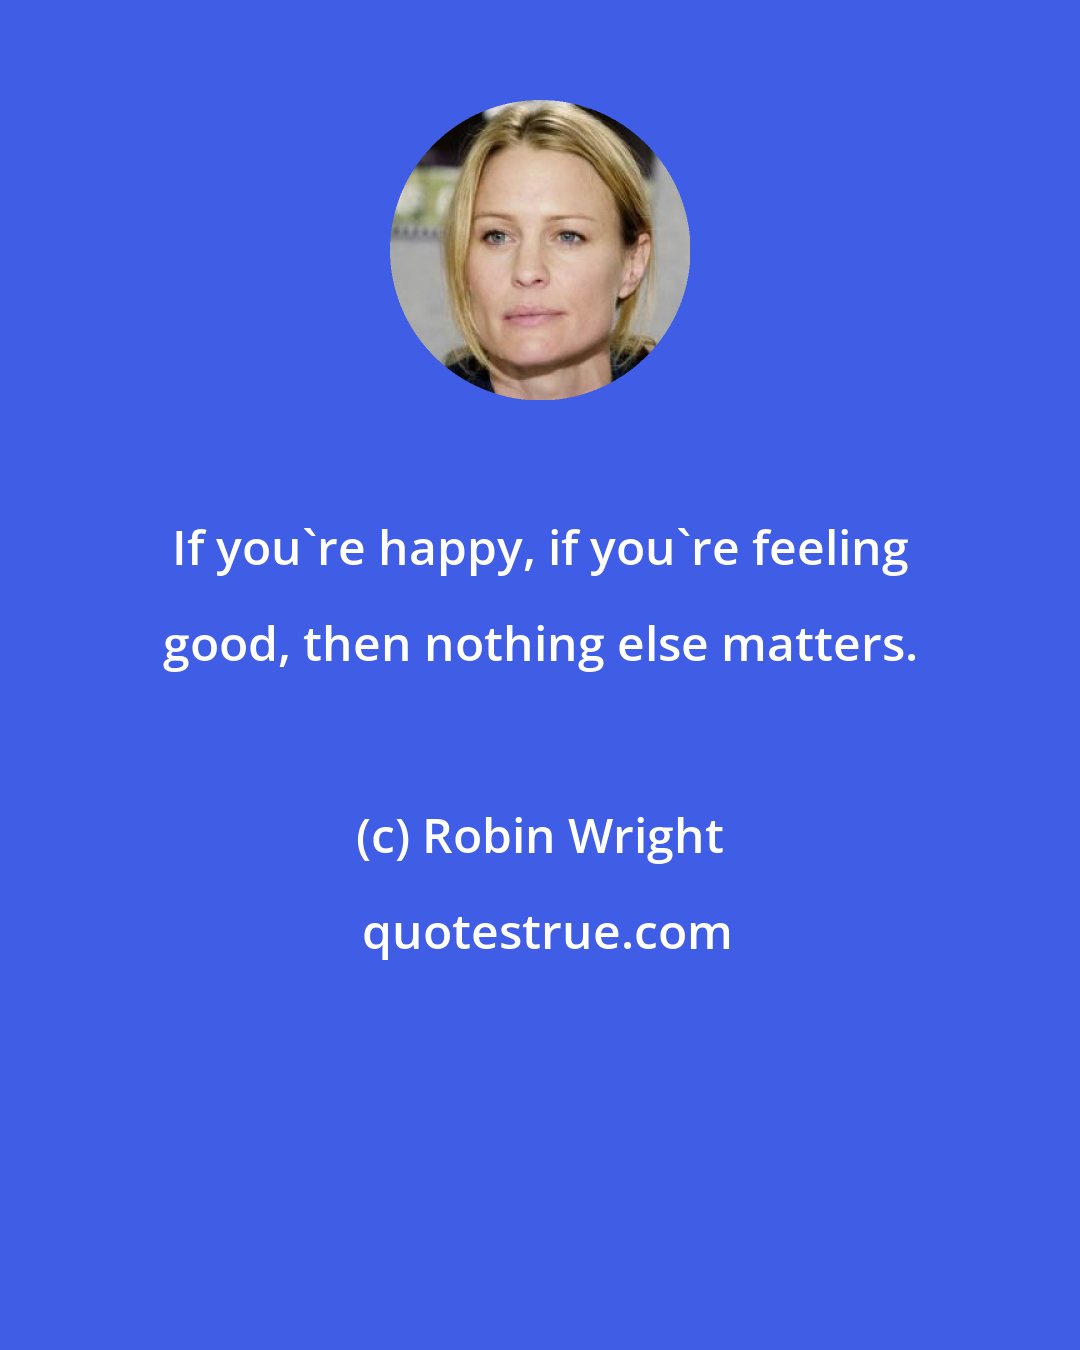 Robin Wright: If you're happy, if you're feeling good, then nothing else matters.